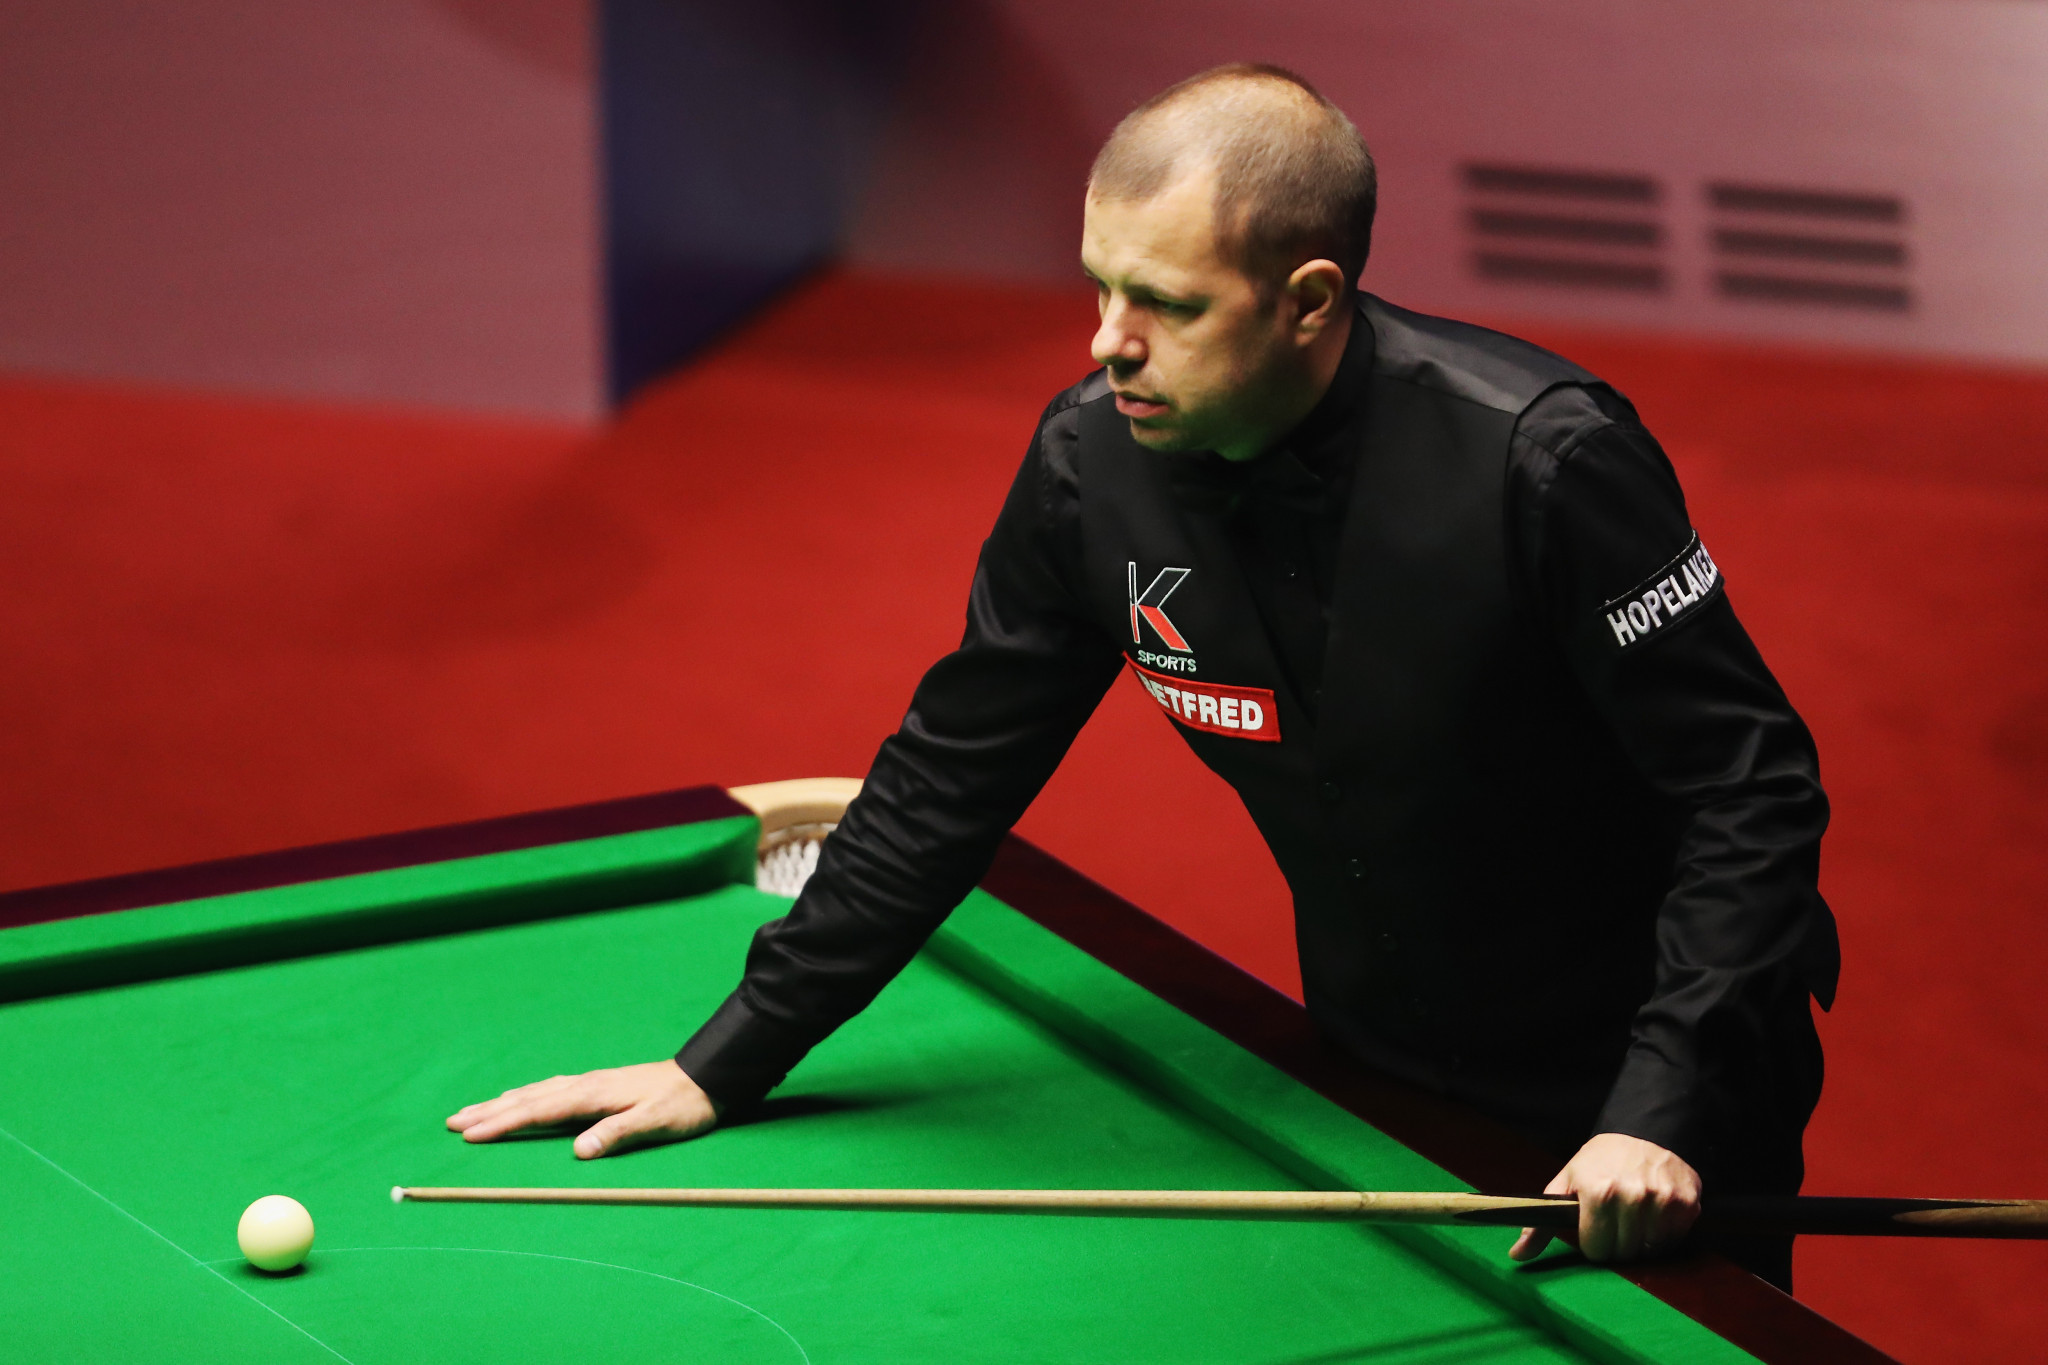 England'sBarry Hawkins will have a two frame lead over Wales' Mark Williams going into tomorrow in their semi-final of the World Snooker Championship in Sheffield ©Getty Images